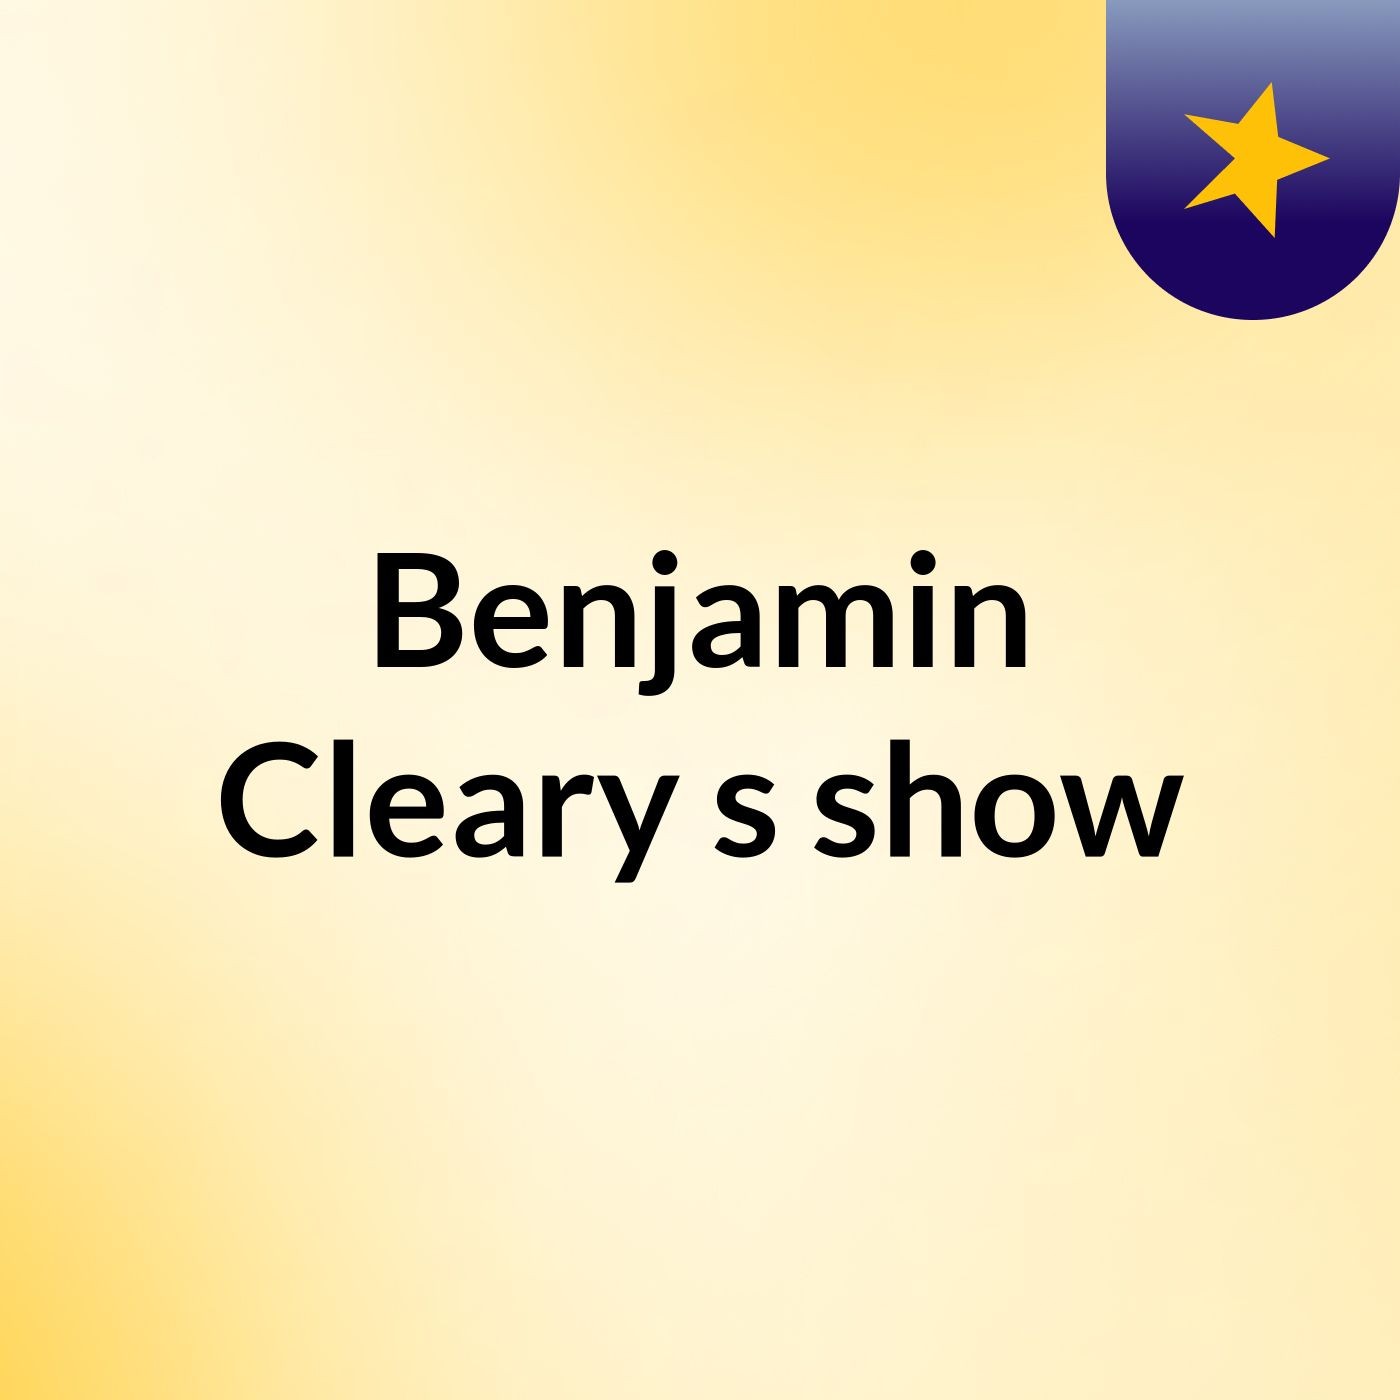 Benjamin Cleary's show